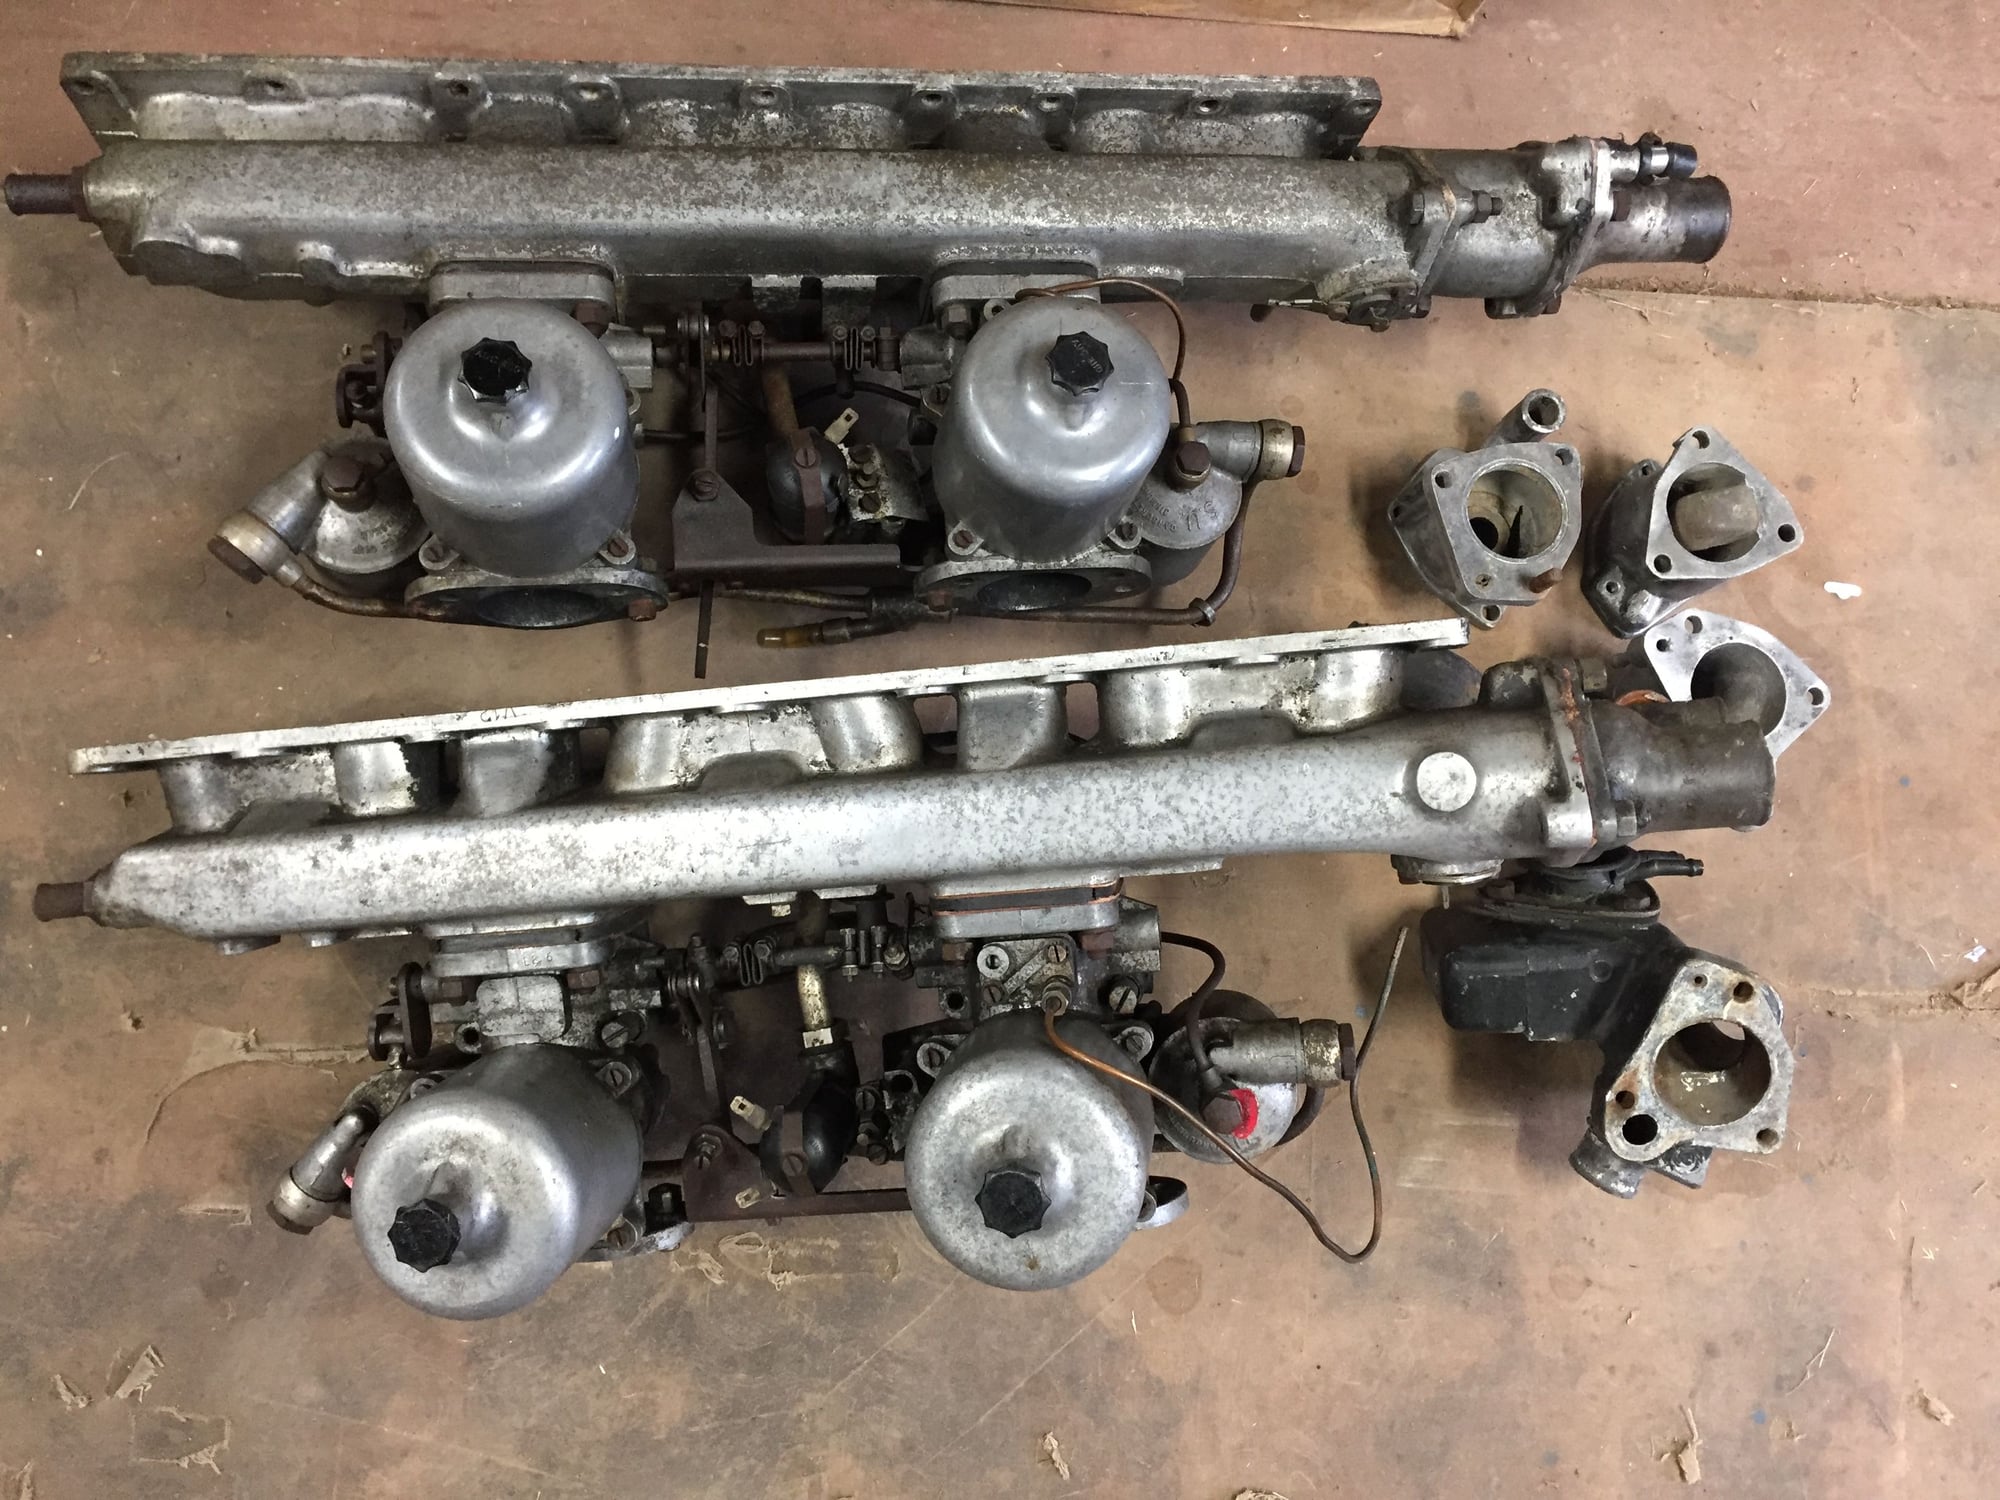 Engine - Intake/Fuel - 2 sets of 420 SU carbs and manifolds $500 each. - Used - Niagara On The Lake, ON L0S1J0, Canada